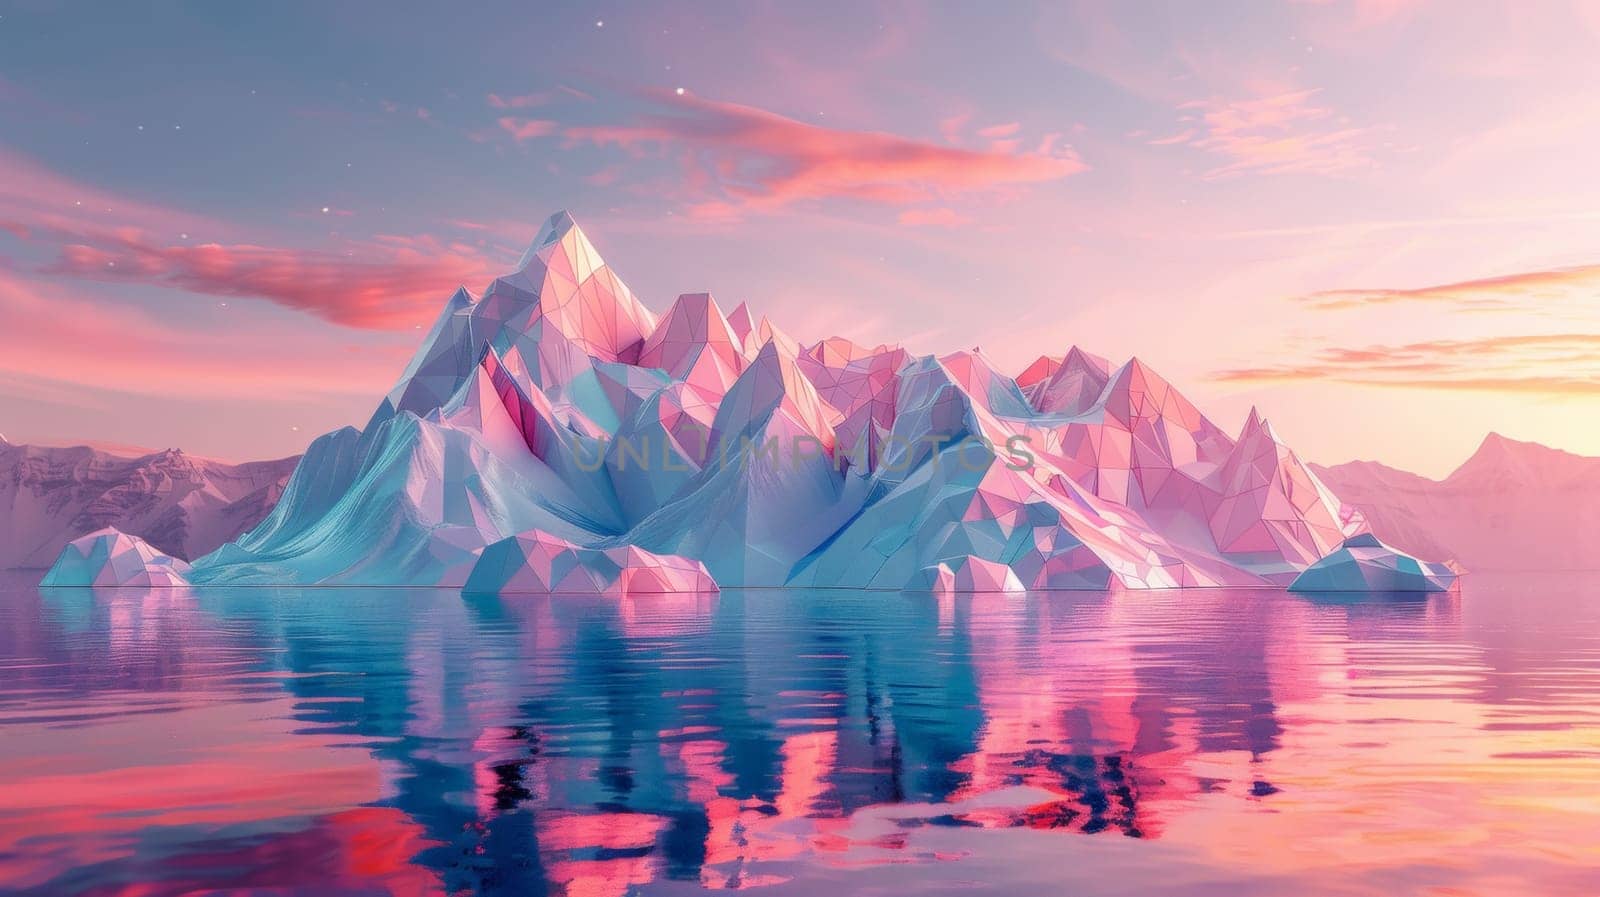 A large iceberg floating in the water with a pink sky